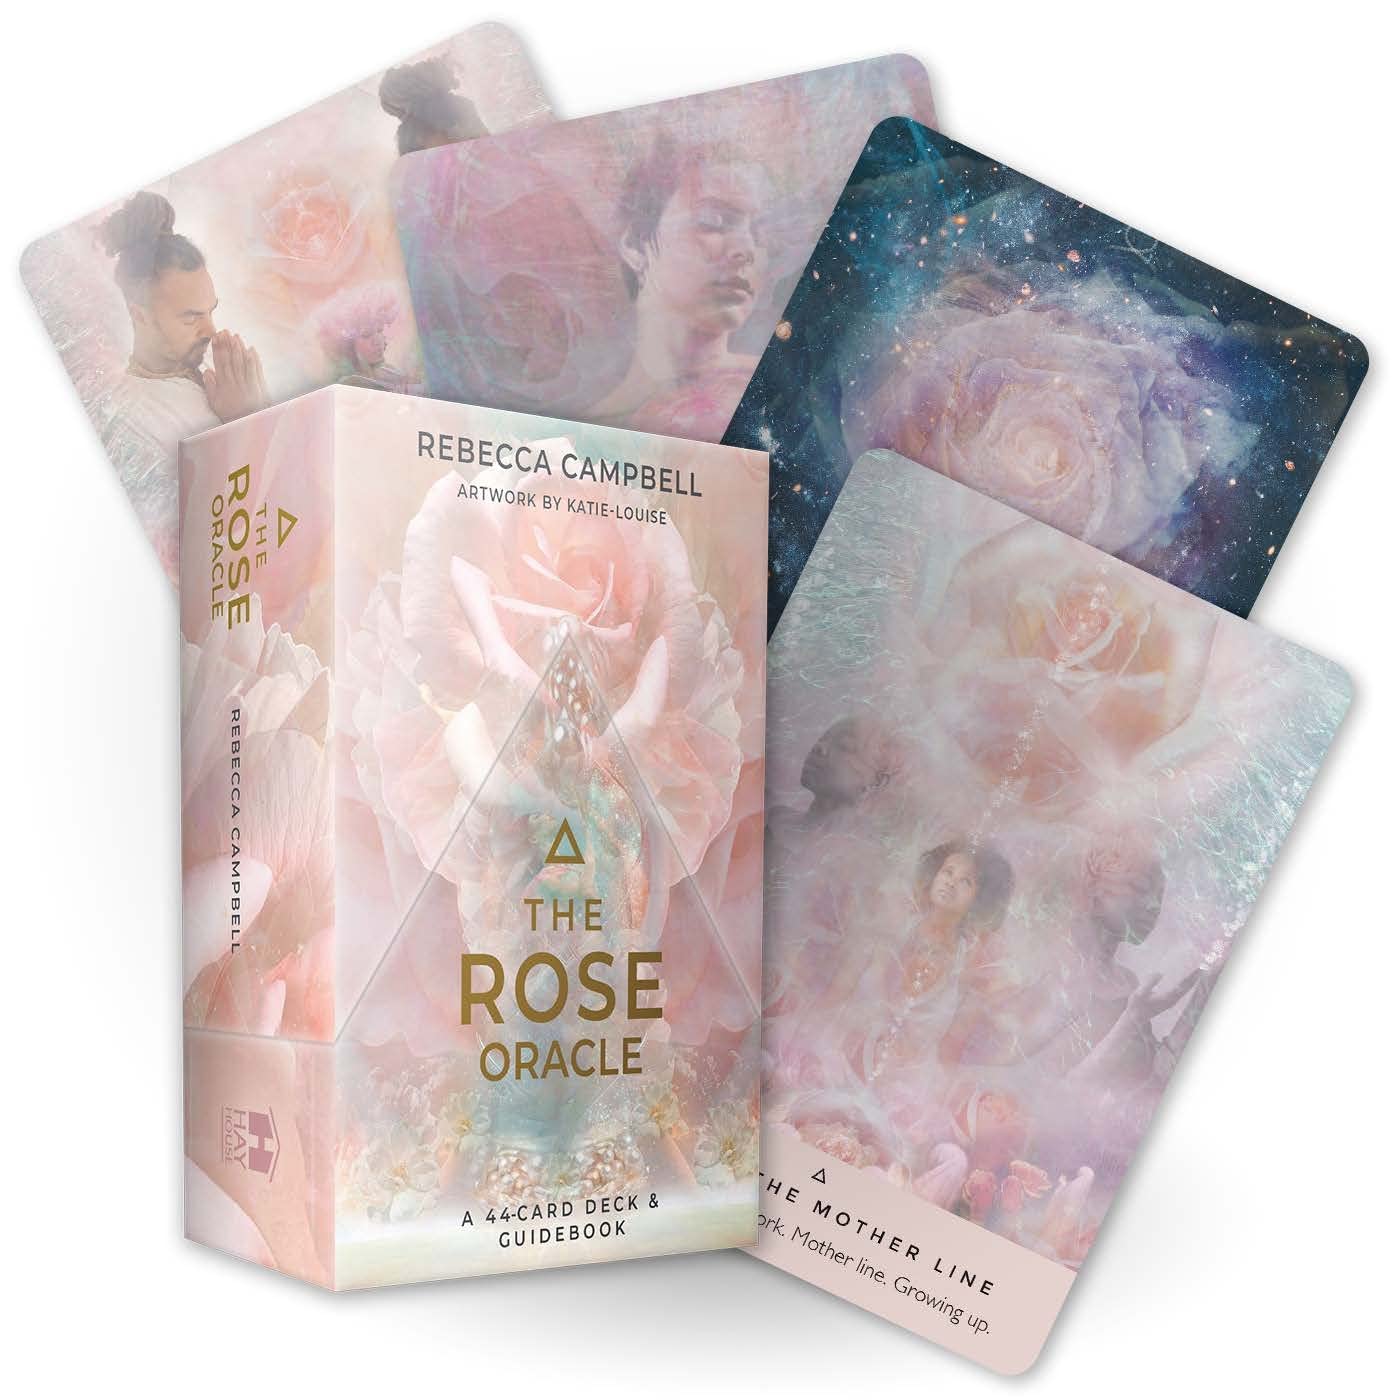 The Rose Oracle: A 44-Card Deck and Guidebook || Rebecca Campbell